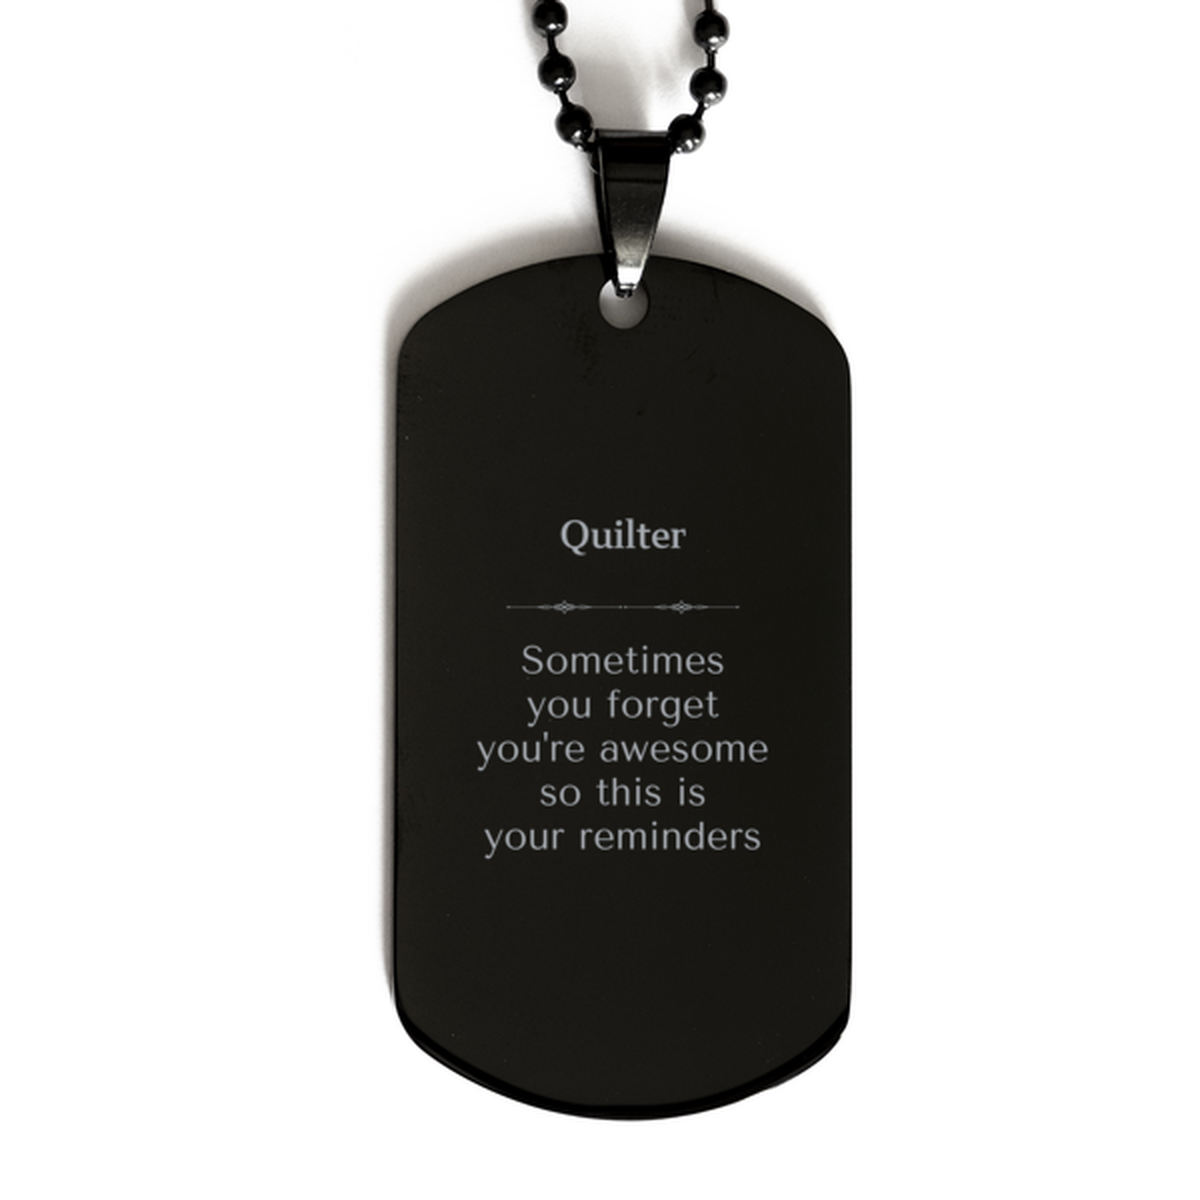 Sentimental Quilter Black Dog Tag, Quilter Sometimes you forget you're awesome so this is your reminders, Graduation Christmas Birthday Gifts for Quilter, Men, Women, Coworkers